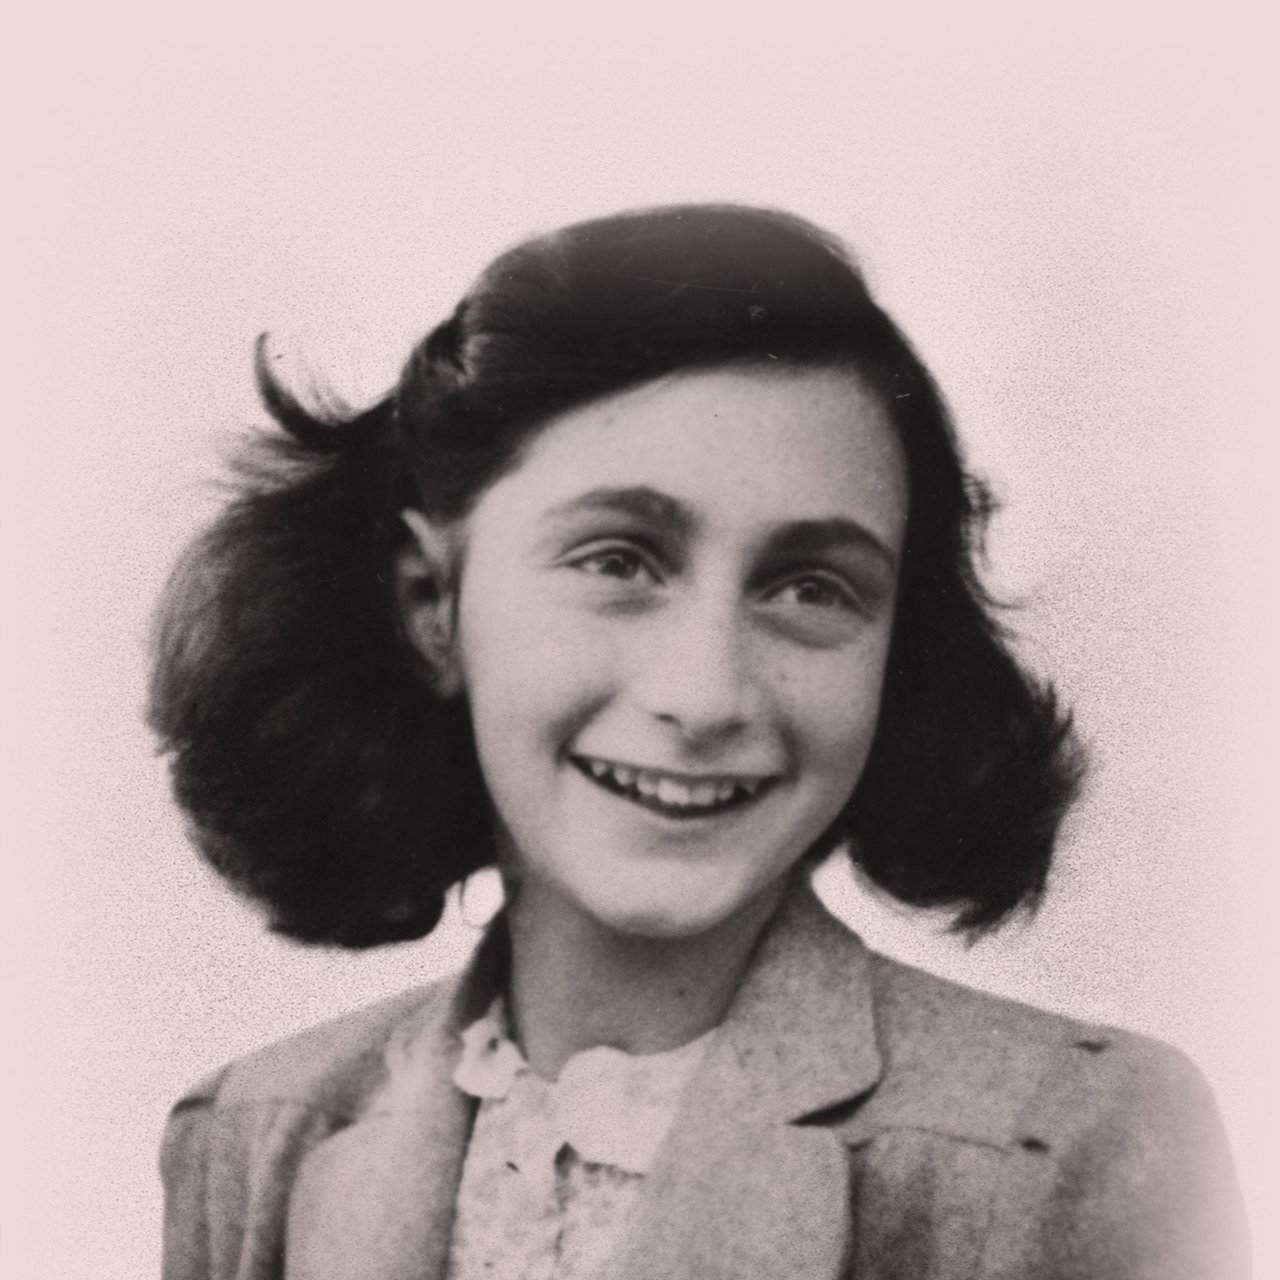 Anne Frank's legacy continues